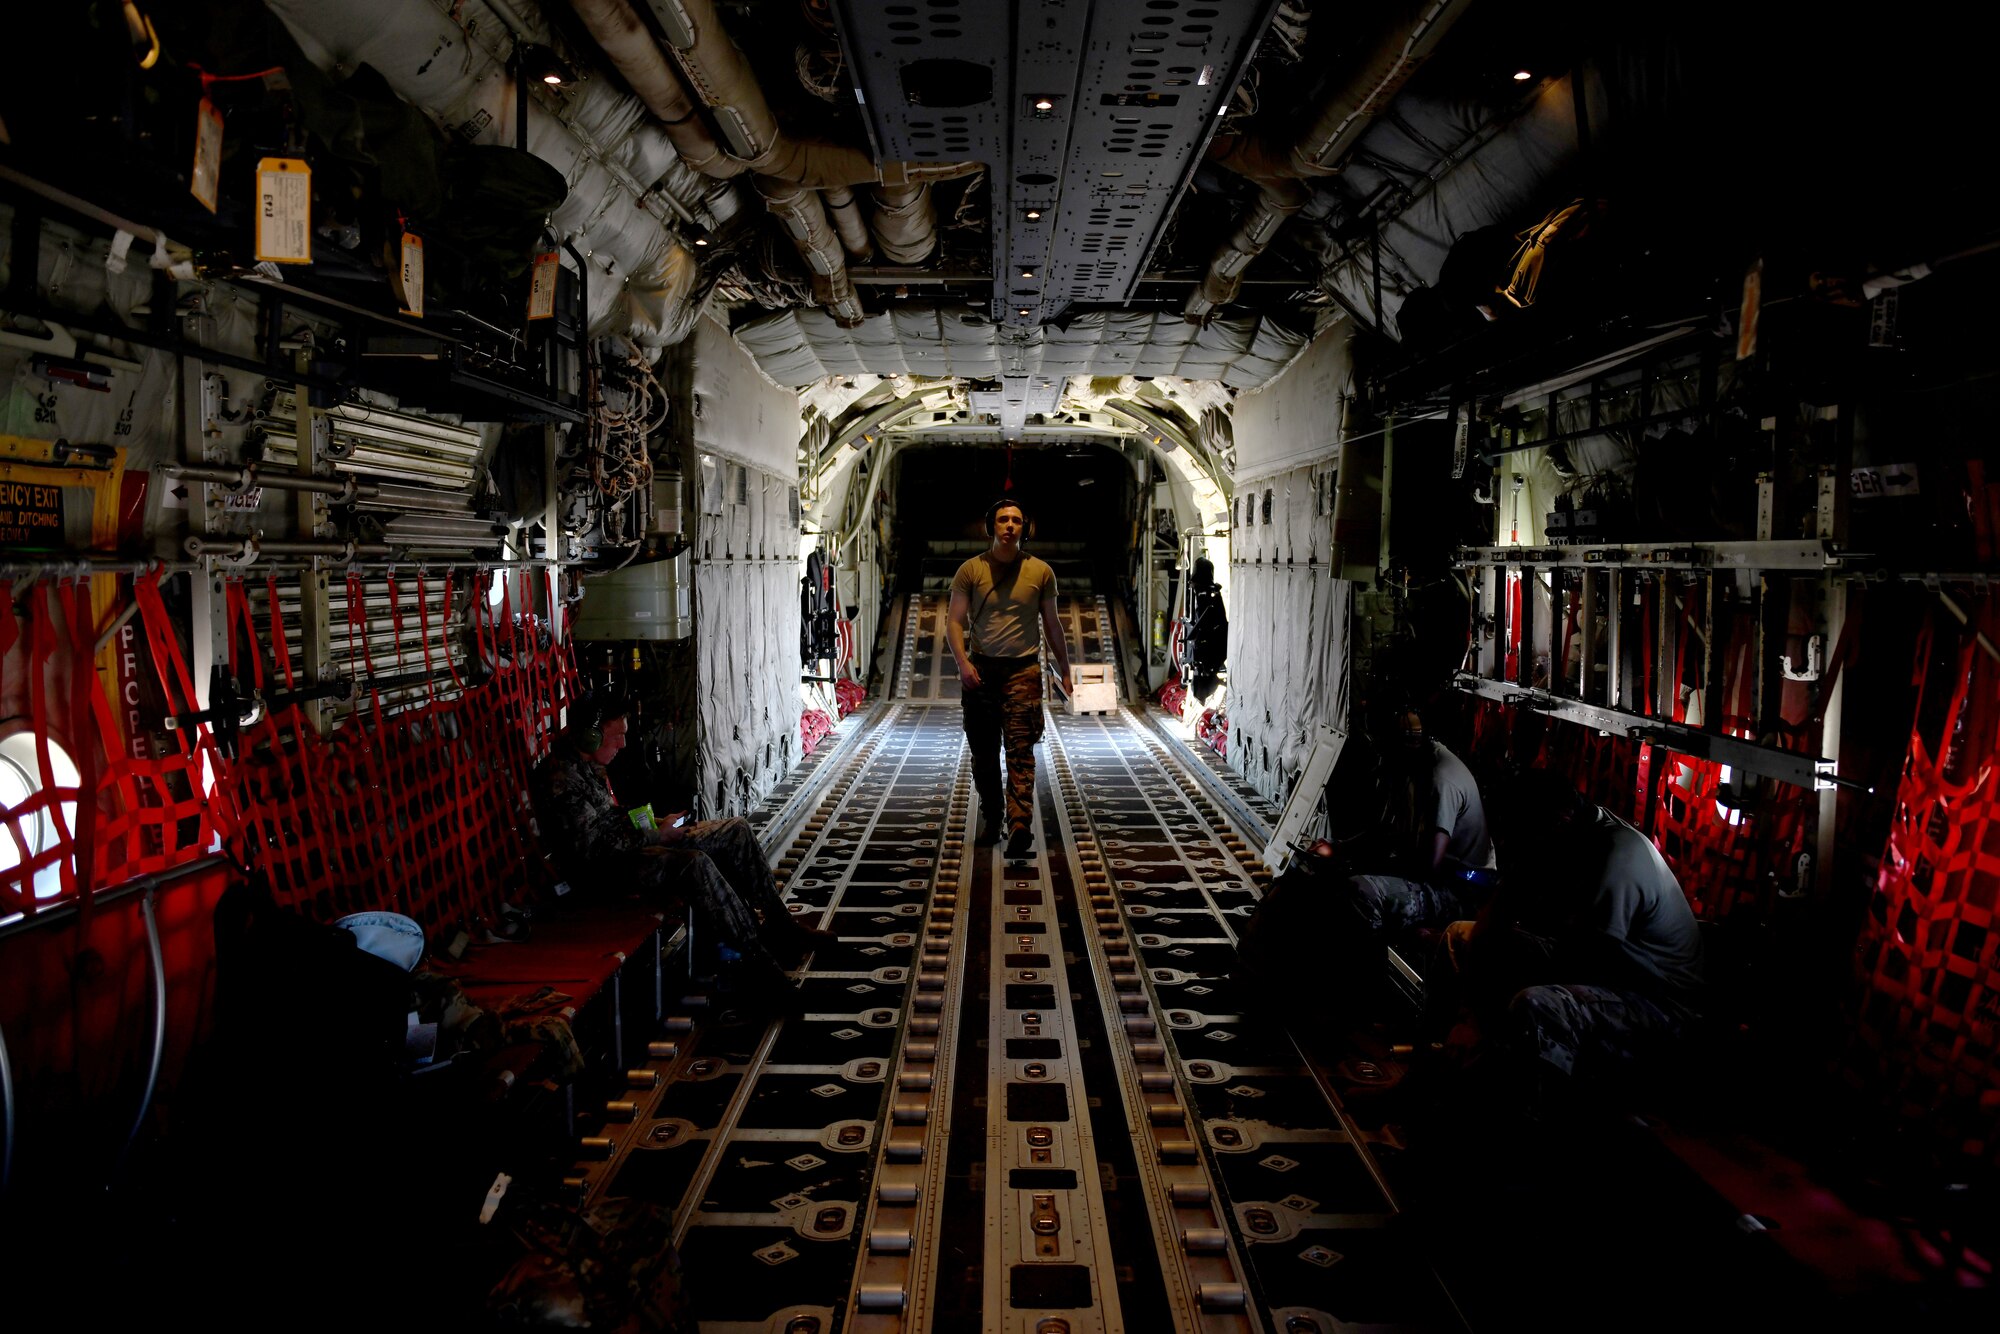 A loadmaster assigned to the 61st Airlift Squadron prepares a C-130J Super Hercules for flight at Little Rock Air Force Base, Arkansas, June 6, 2020. More than 20 C-130Js and C-17 Globemaster IIIs flew in formation during the U.S. Air Force Weapons School’s Joint Forcible Entry exercise with numerous other aircraft from across the Air Force. (U.S. Air Force photo by Senior Airman Kristine M. Gruwell)